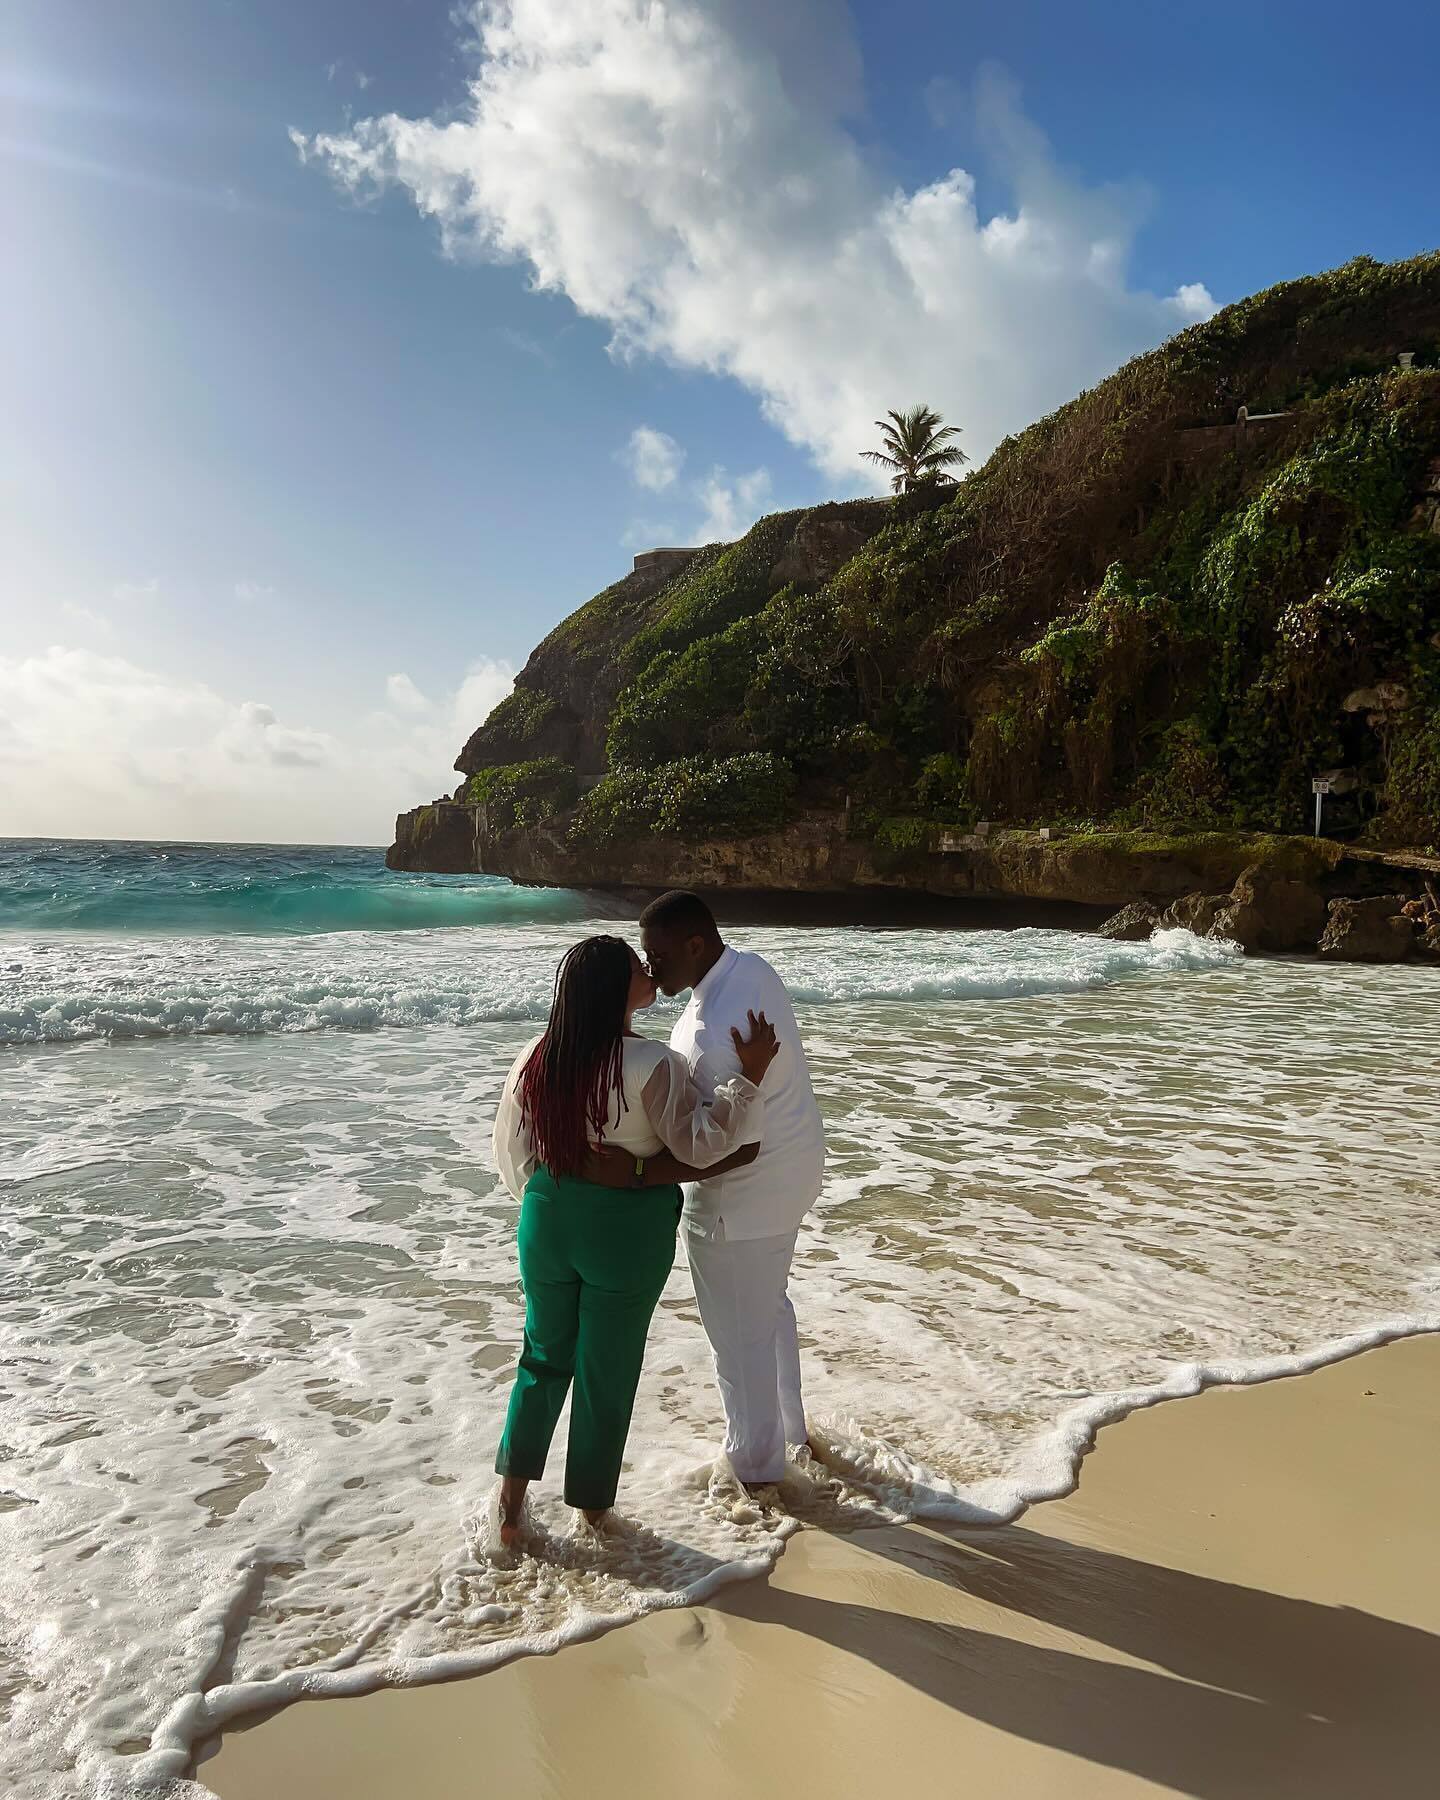 Escape to the sun: in which Caribbean country is the best place to relax